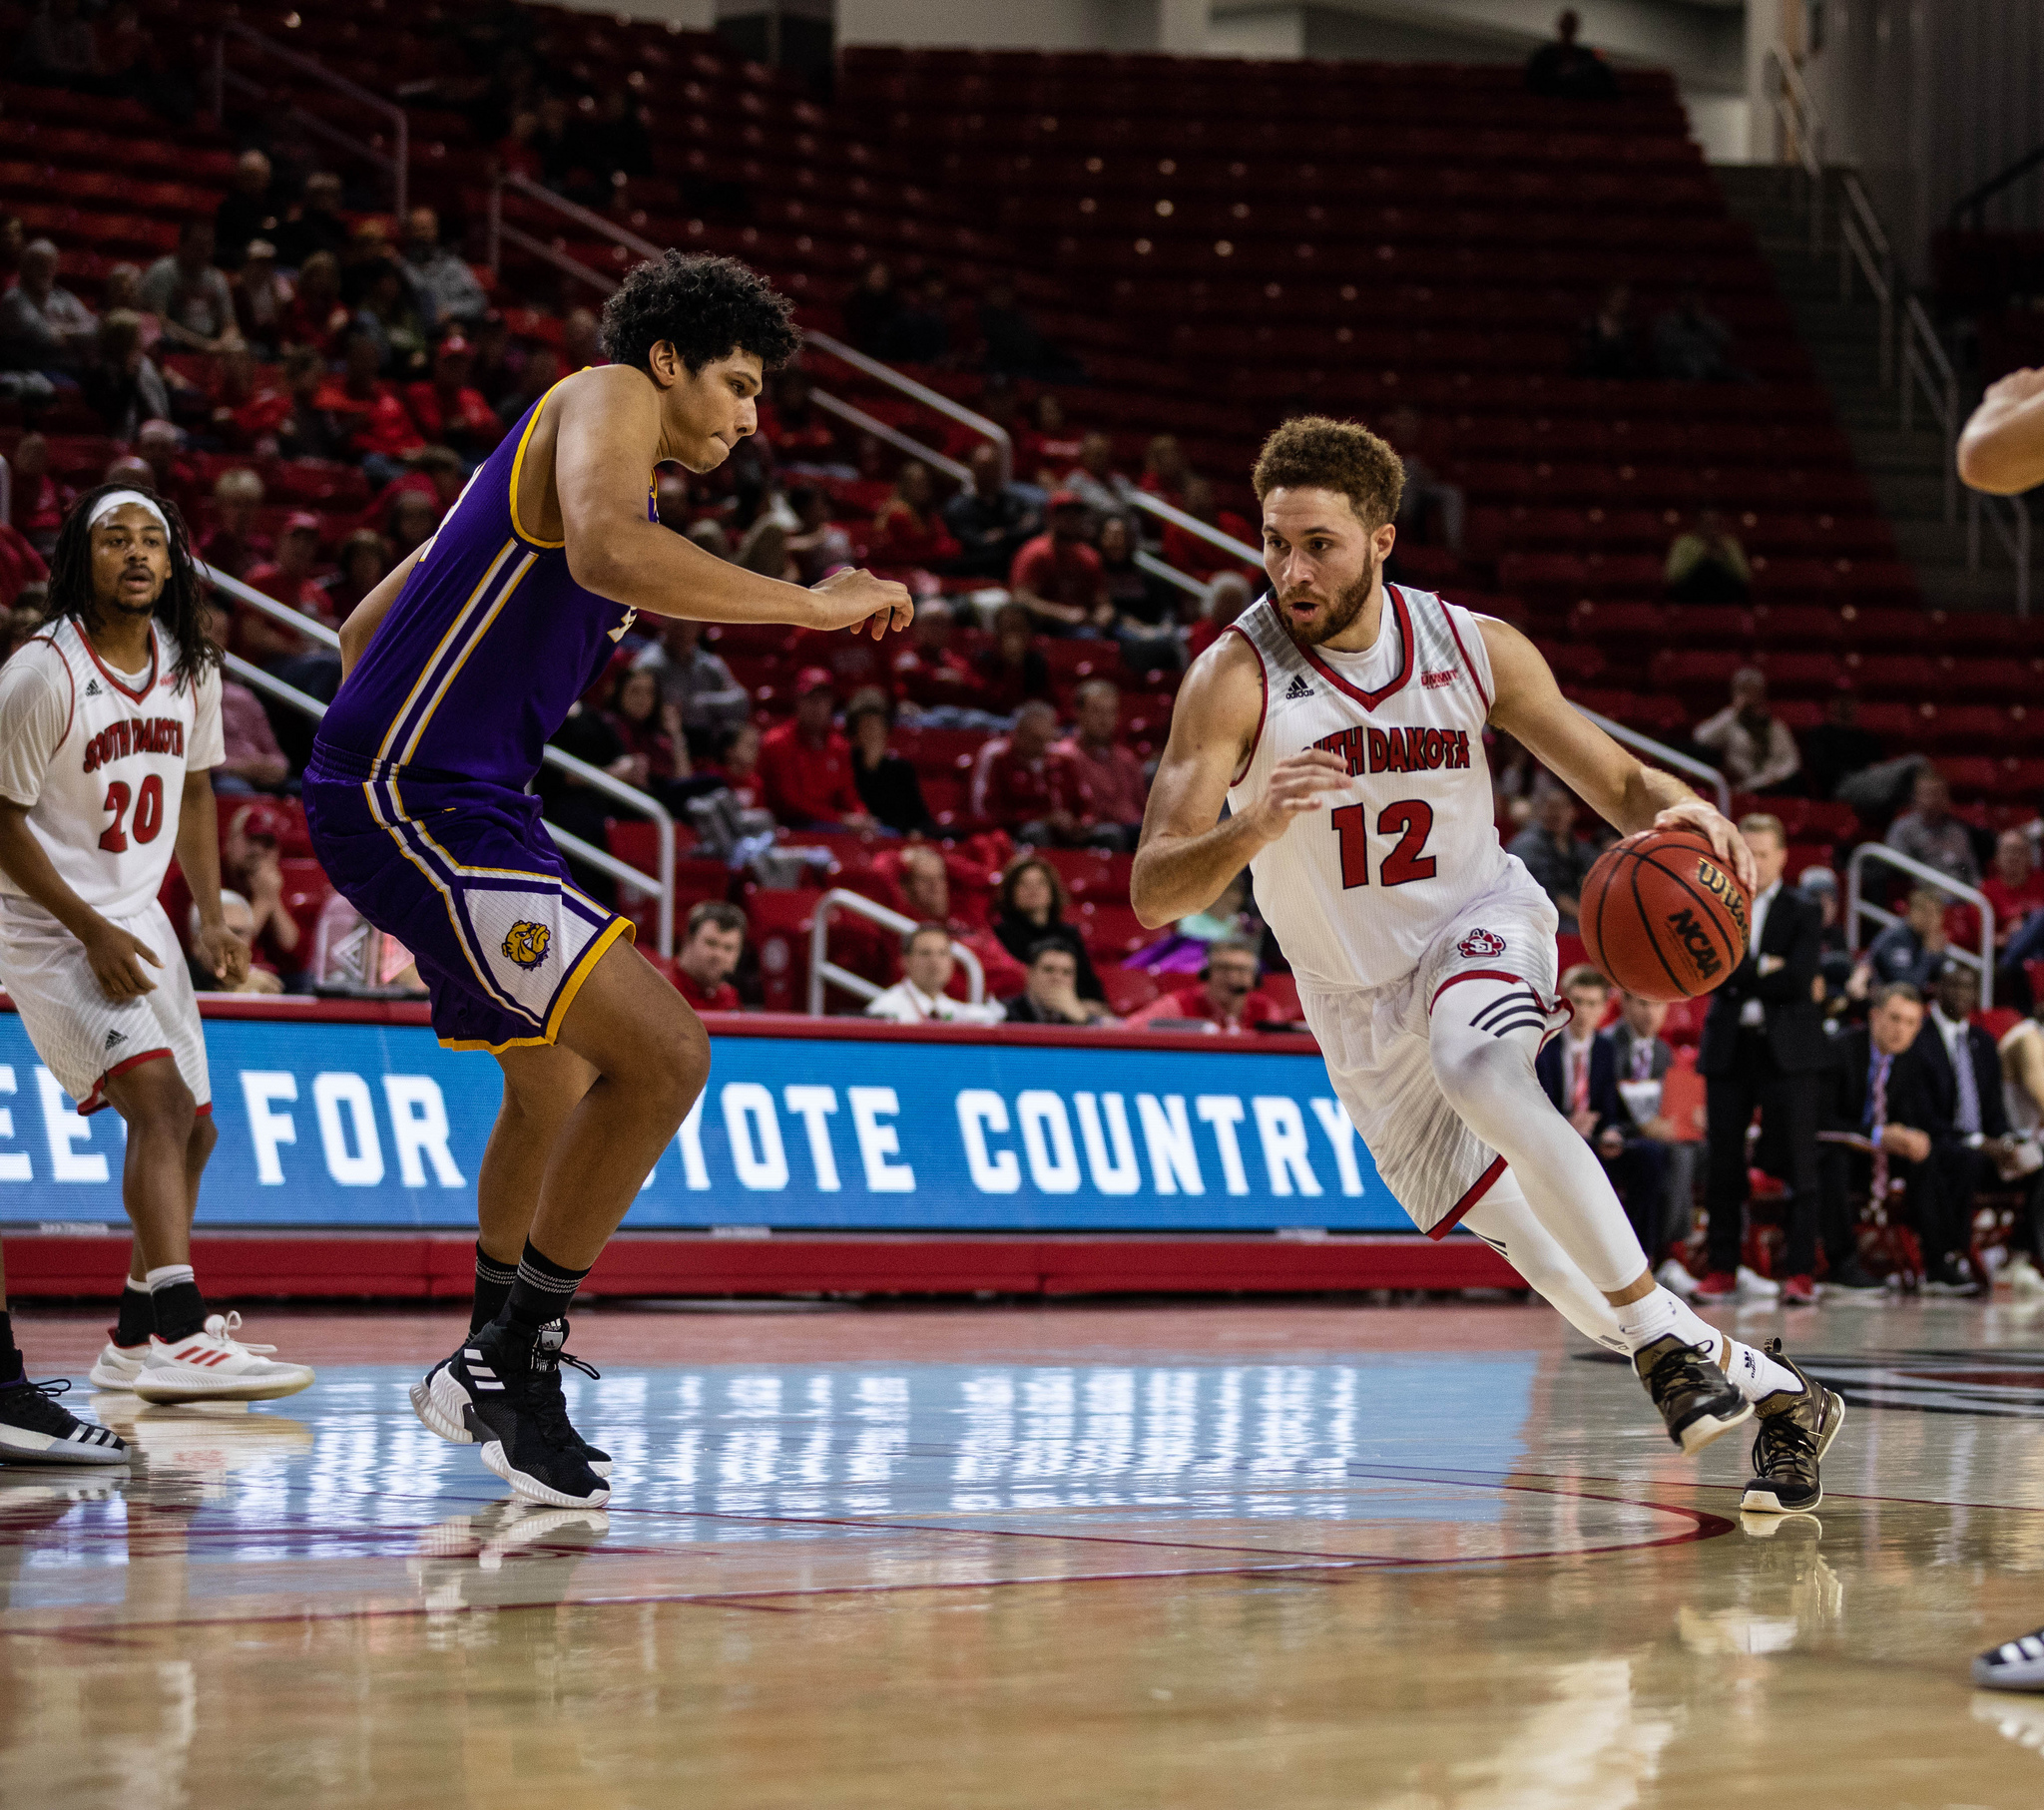 Coyotes go cold in second half, fall to Western Illinois